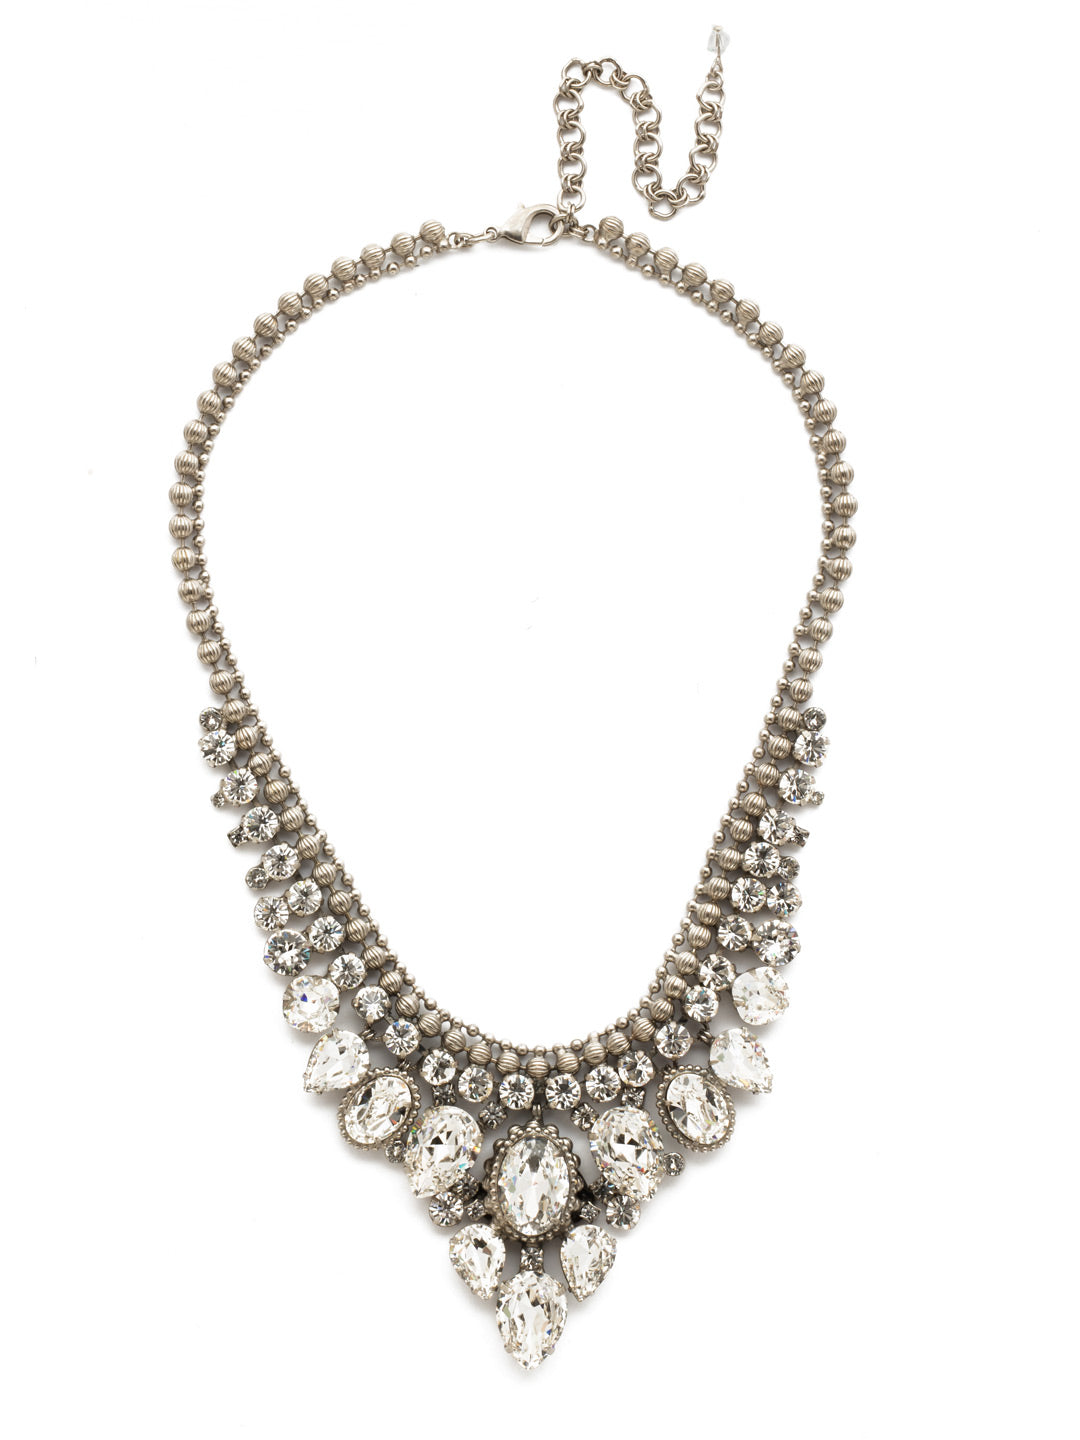 Protea Statement Statement Necklace - NDQ3ASCRY - <p>If you feel that bold is better, Protea is the necklace for you! With en elegantly edged chain and crystal for days, this statement-making style pairs perfectly with everything from your favorite party dress to jeans and a sweater! From Sorrelli's Crystal collection in our Antique Silver-tone finish.</p>